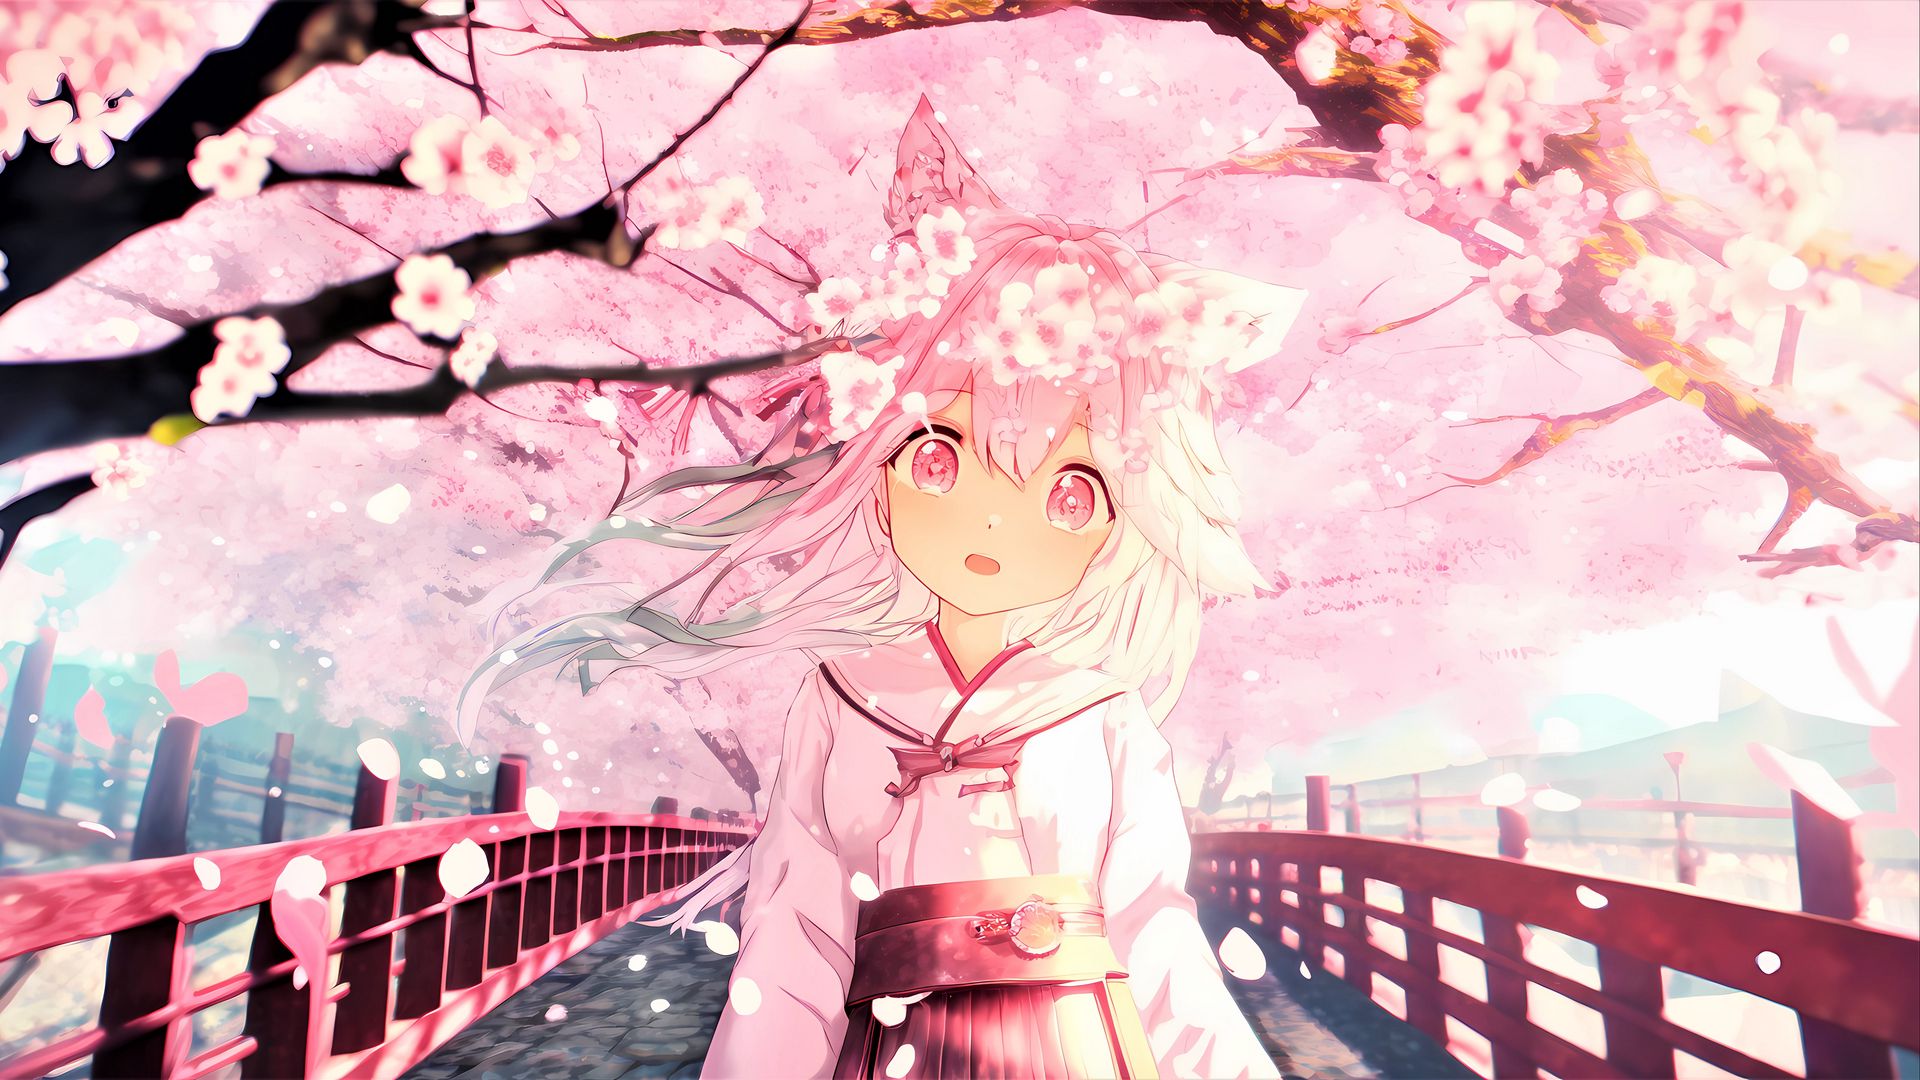 13 Anime Spring Wallpapers for iPhone and Android by Isaac Frazier